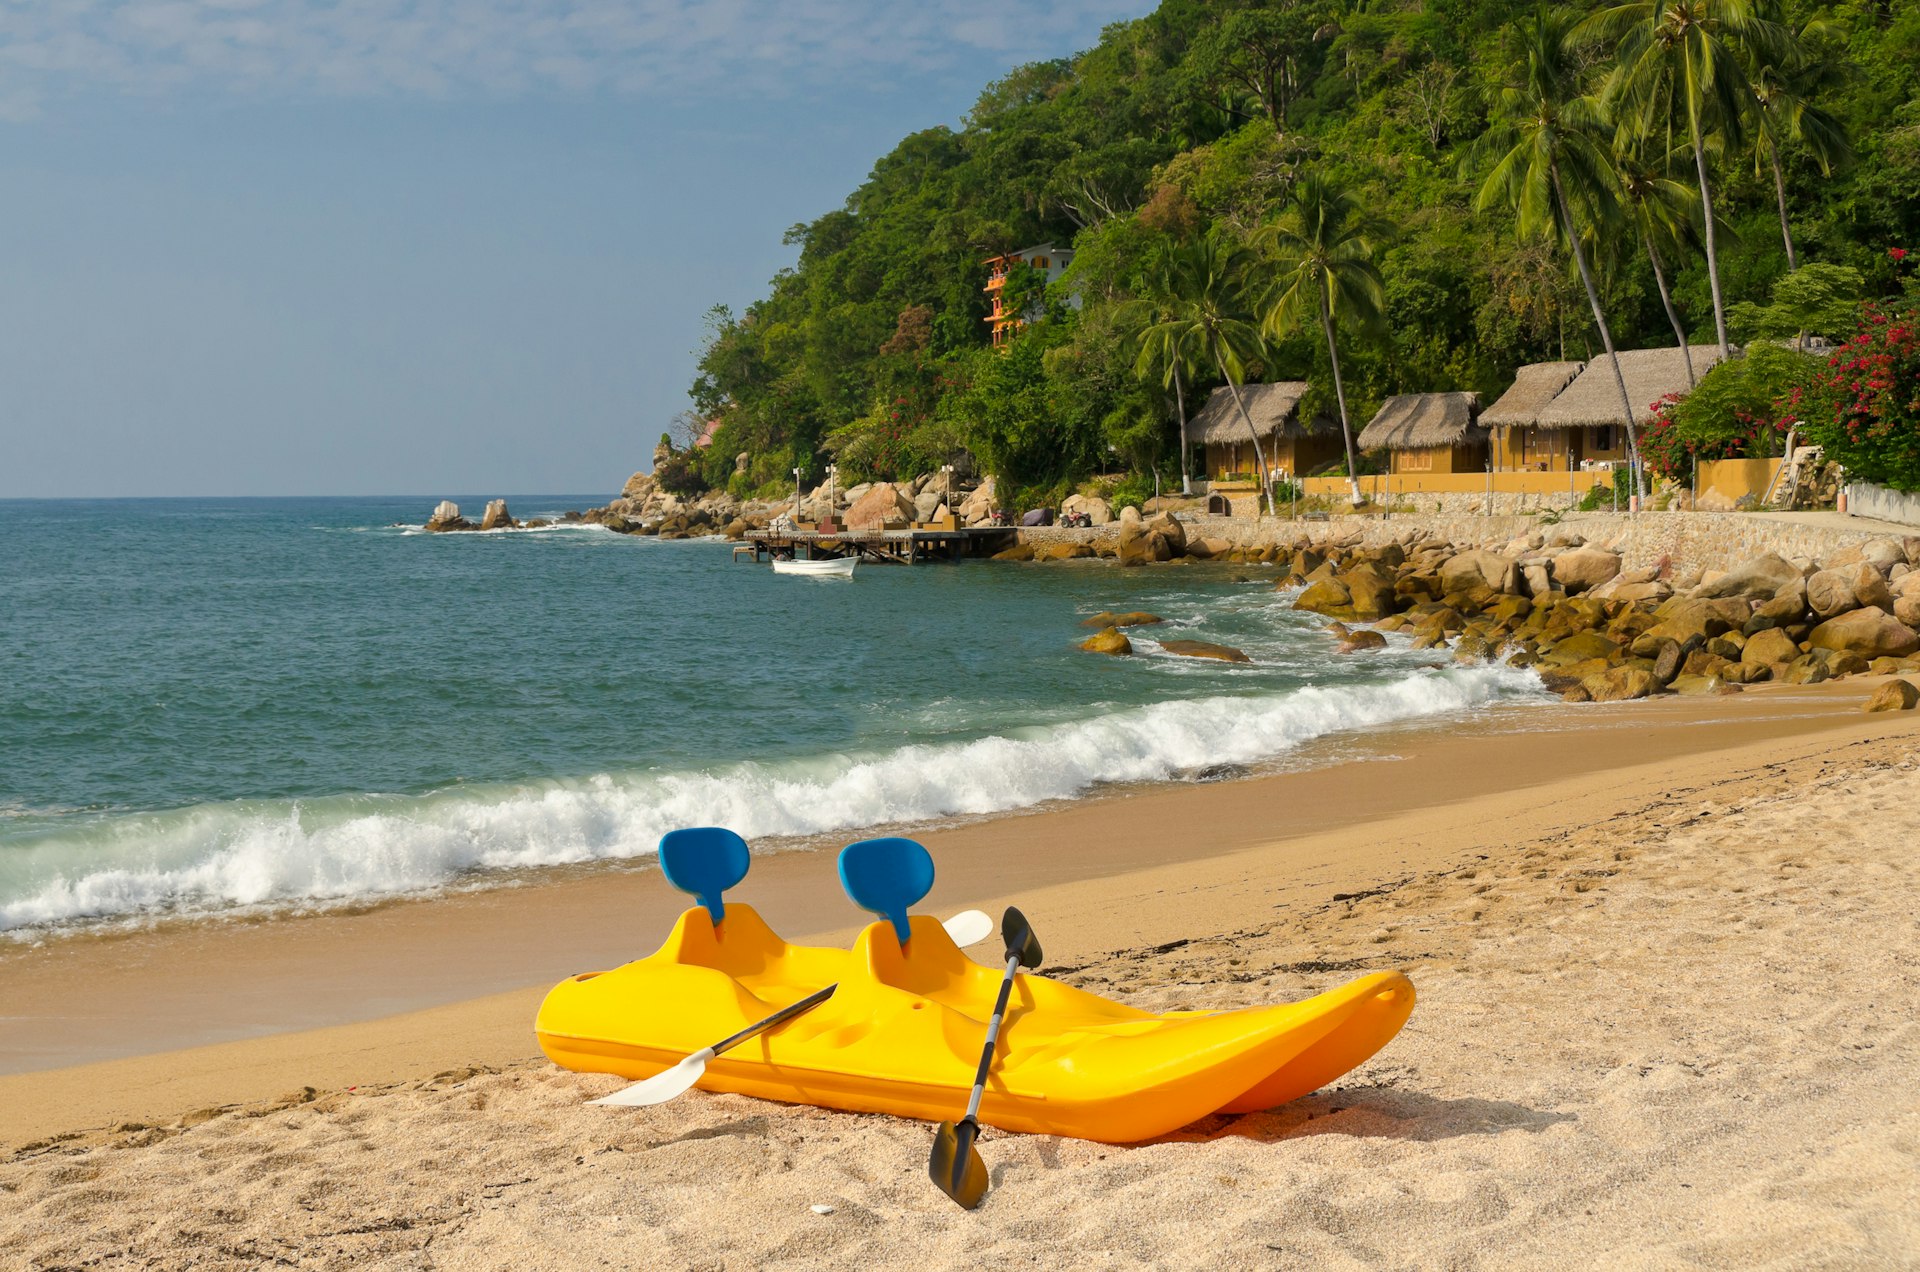 A bright yellow plastic kayak rests on the sand next to the gently lapping waves on a tropical beach in Yelapa, Puerto Vallarta